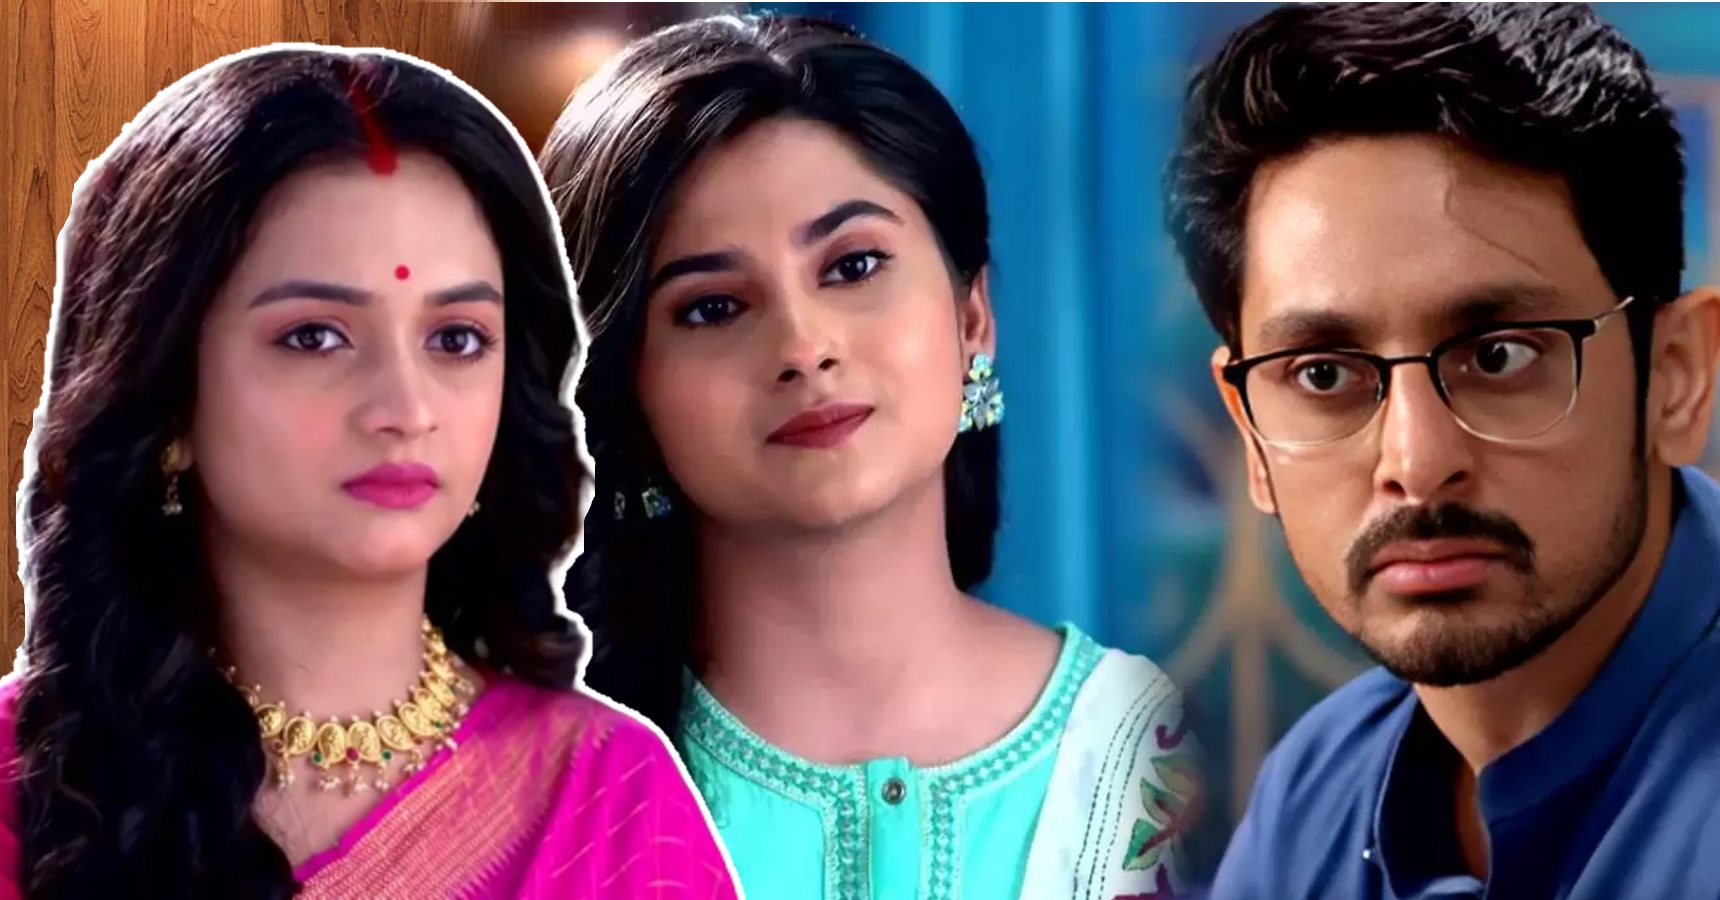 Icche Putul Megh decides to get Mayuri and Souraneel married